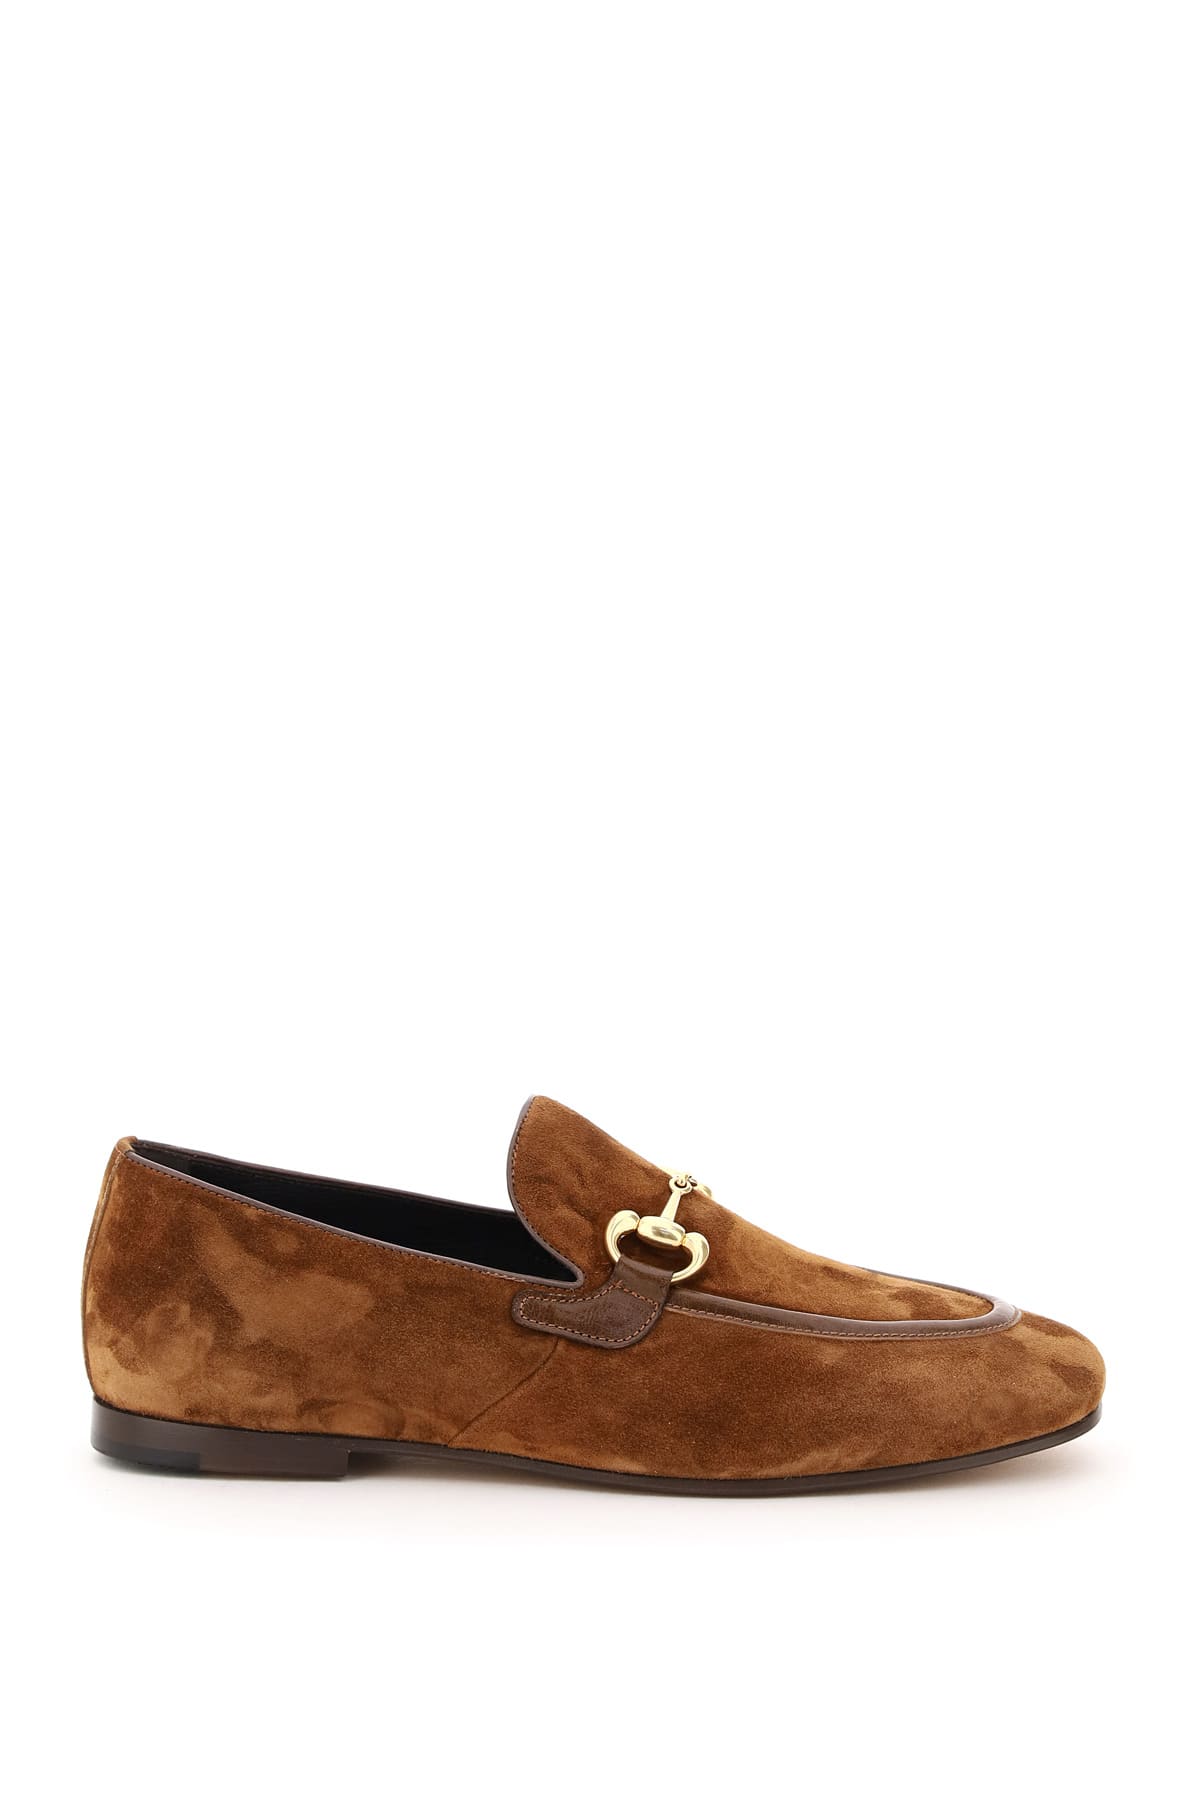 Henderson Baracco Suede Leather Loafers